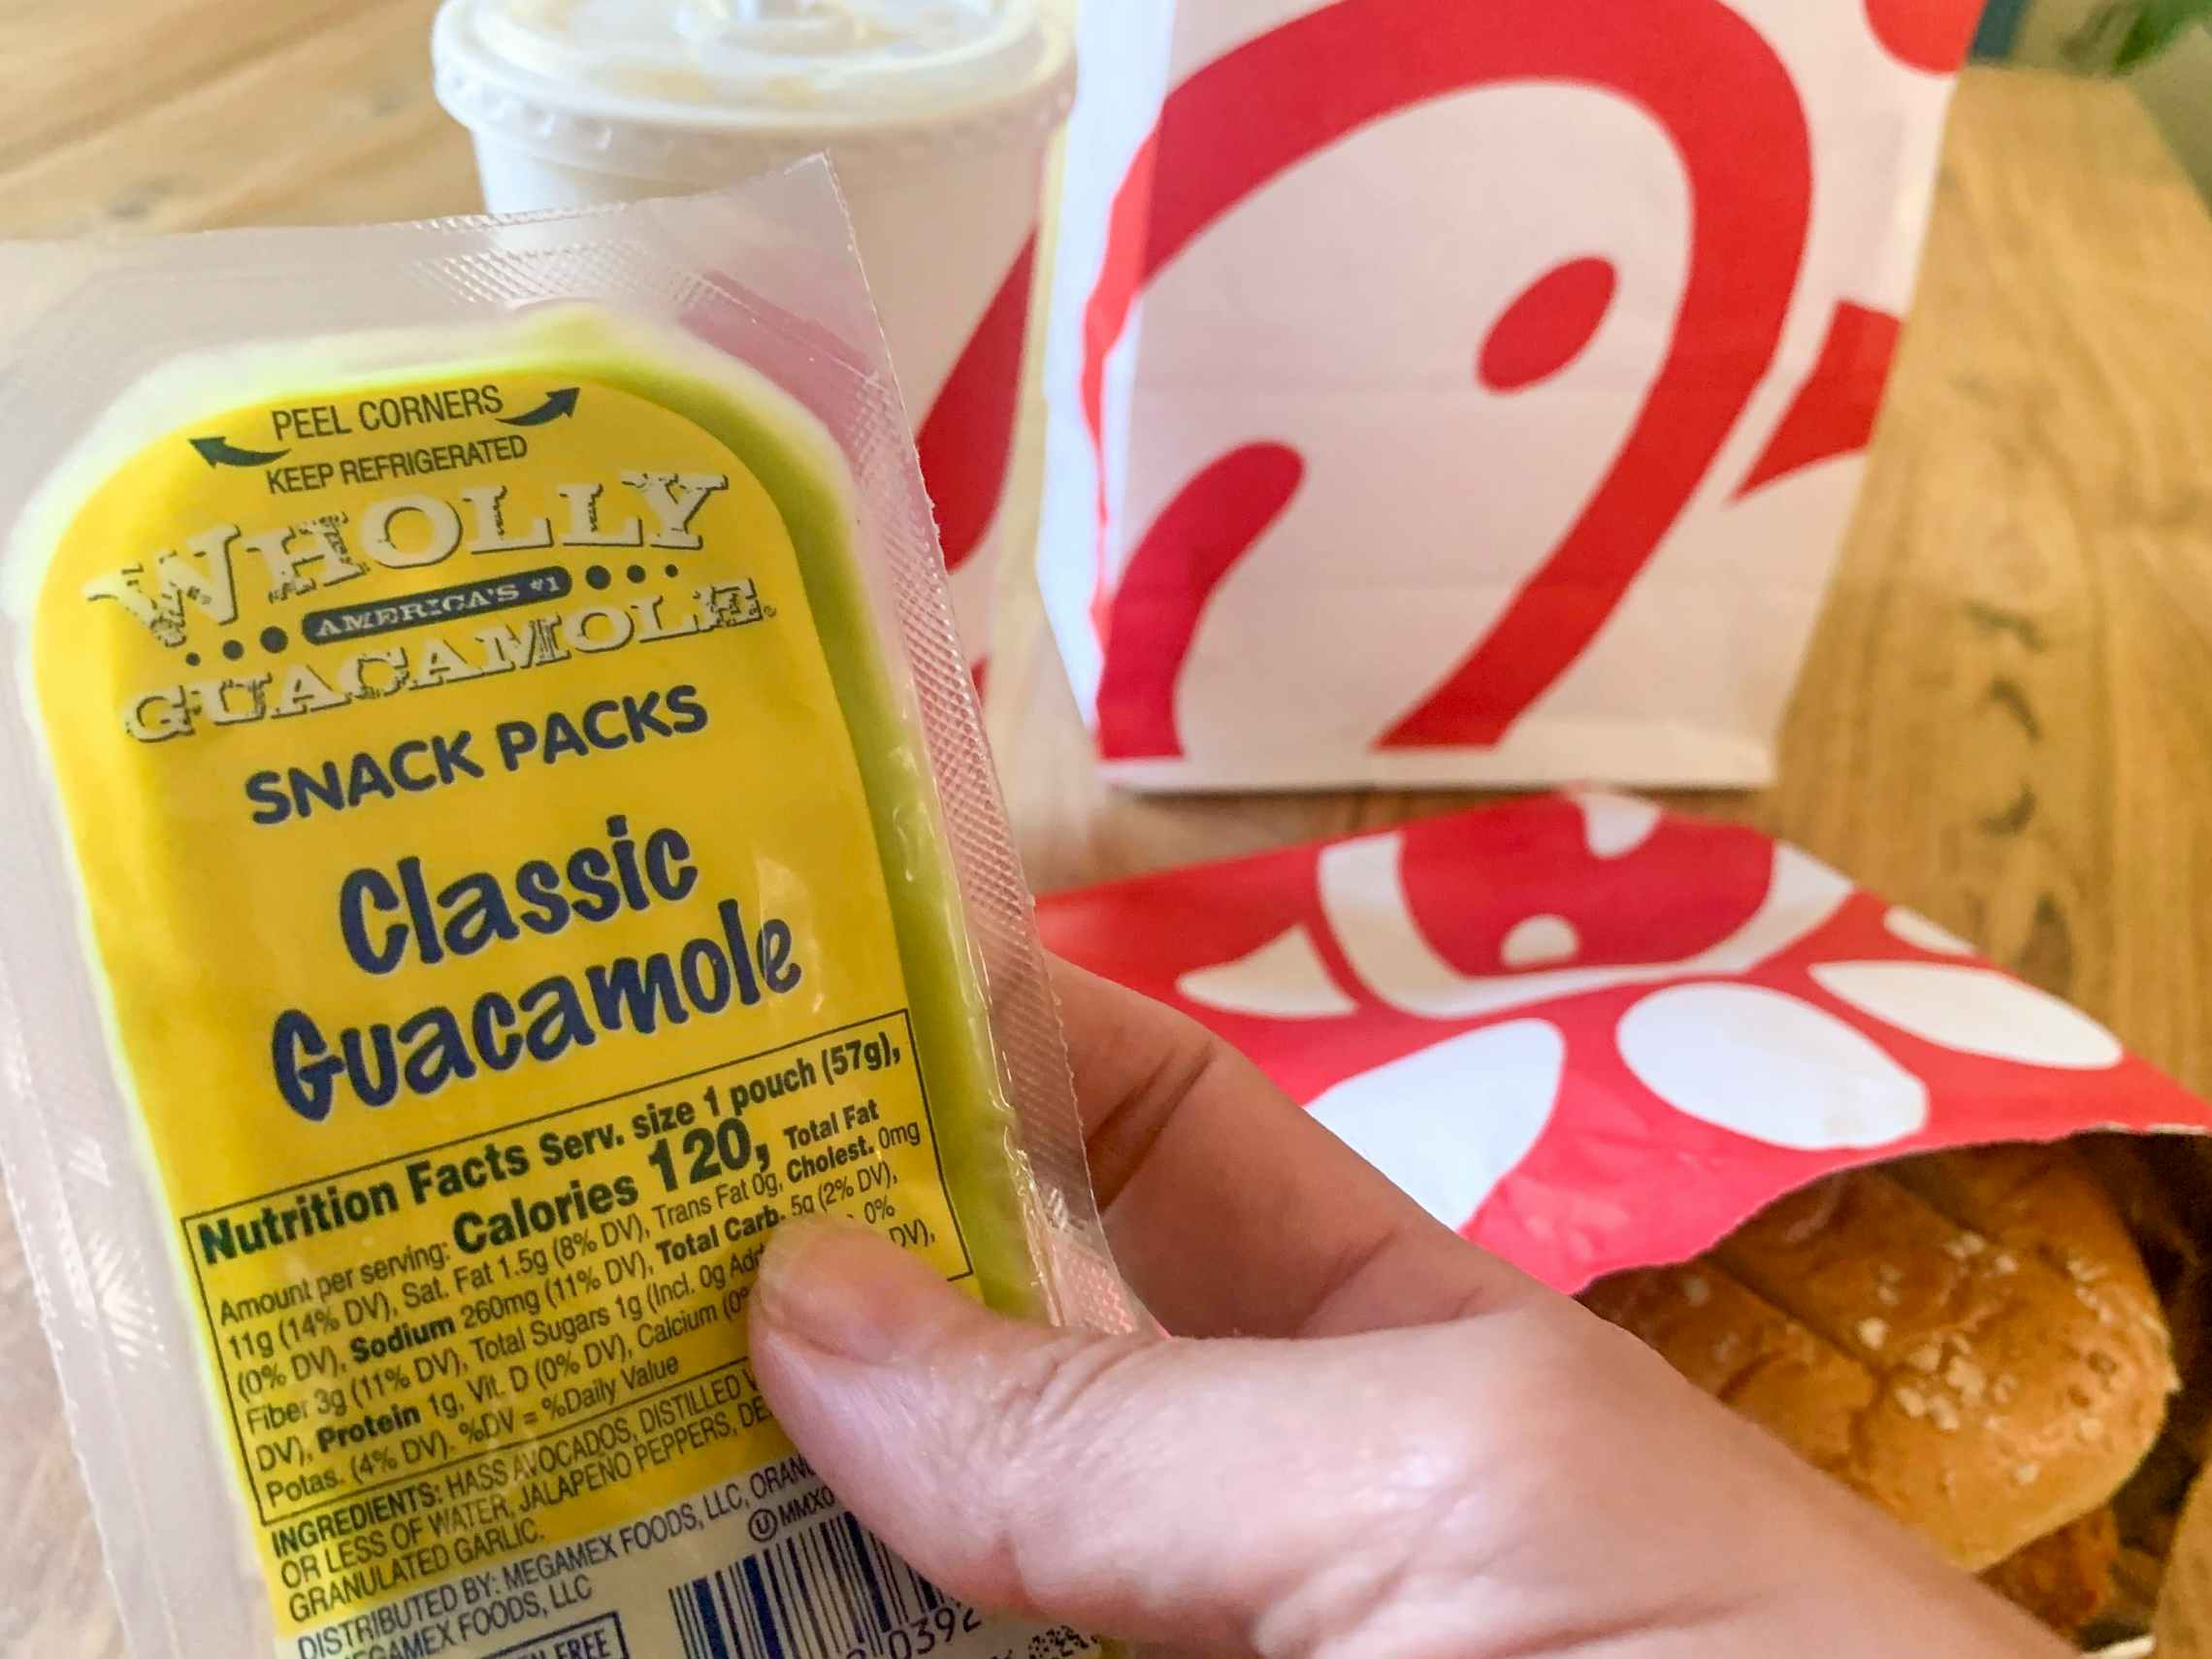 A person's hand holding a snack-pack-sized classic Guacamole next to a Chick-fil-A sandwich and drink.